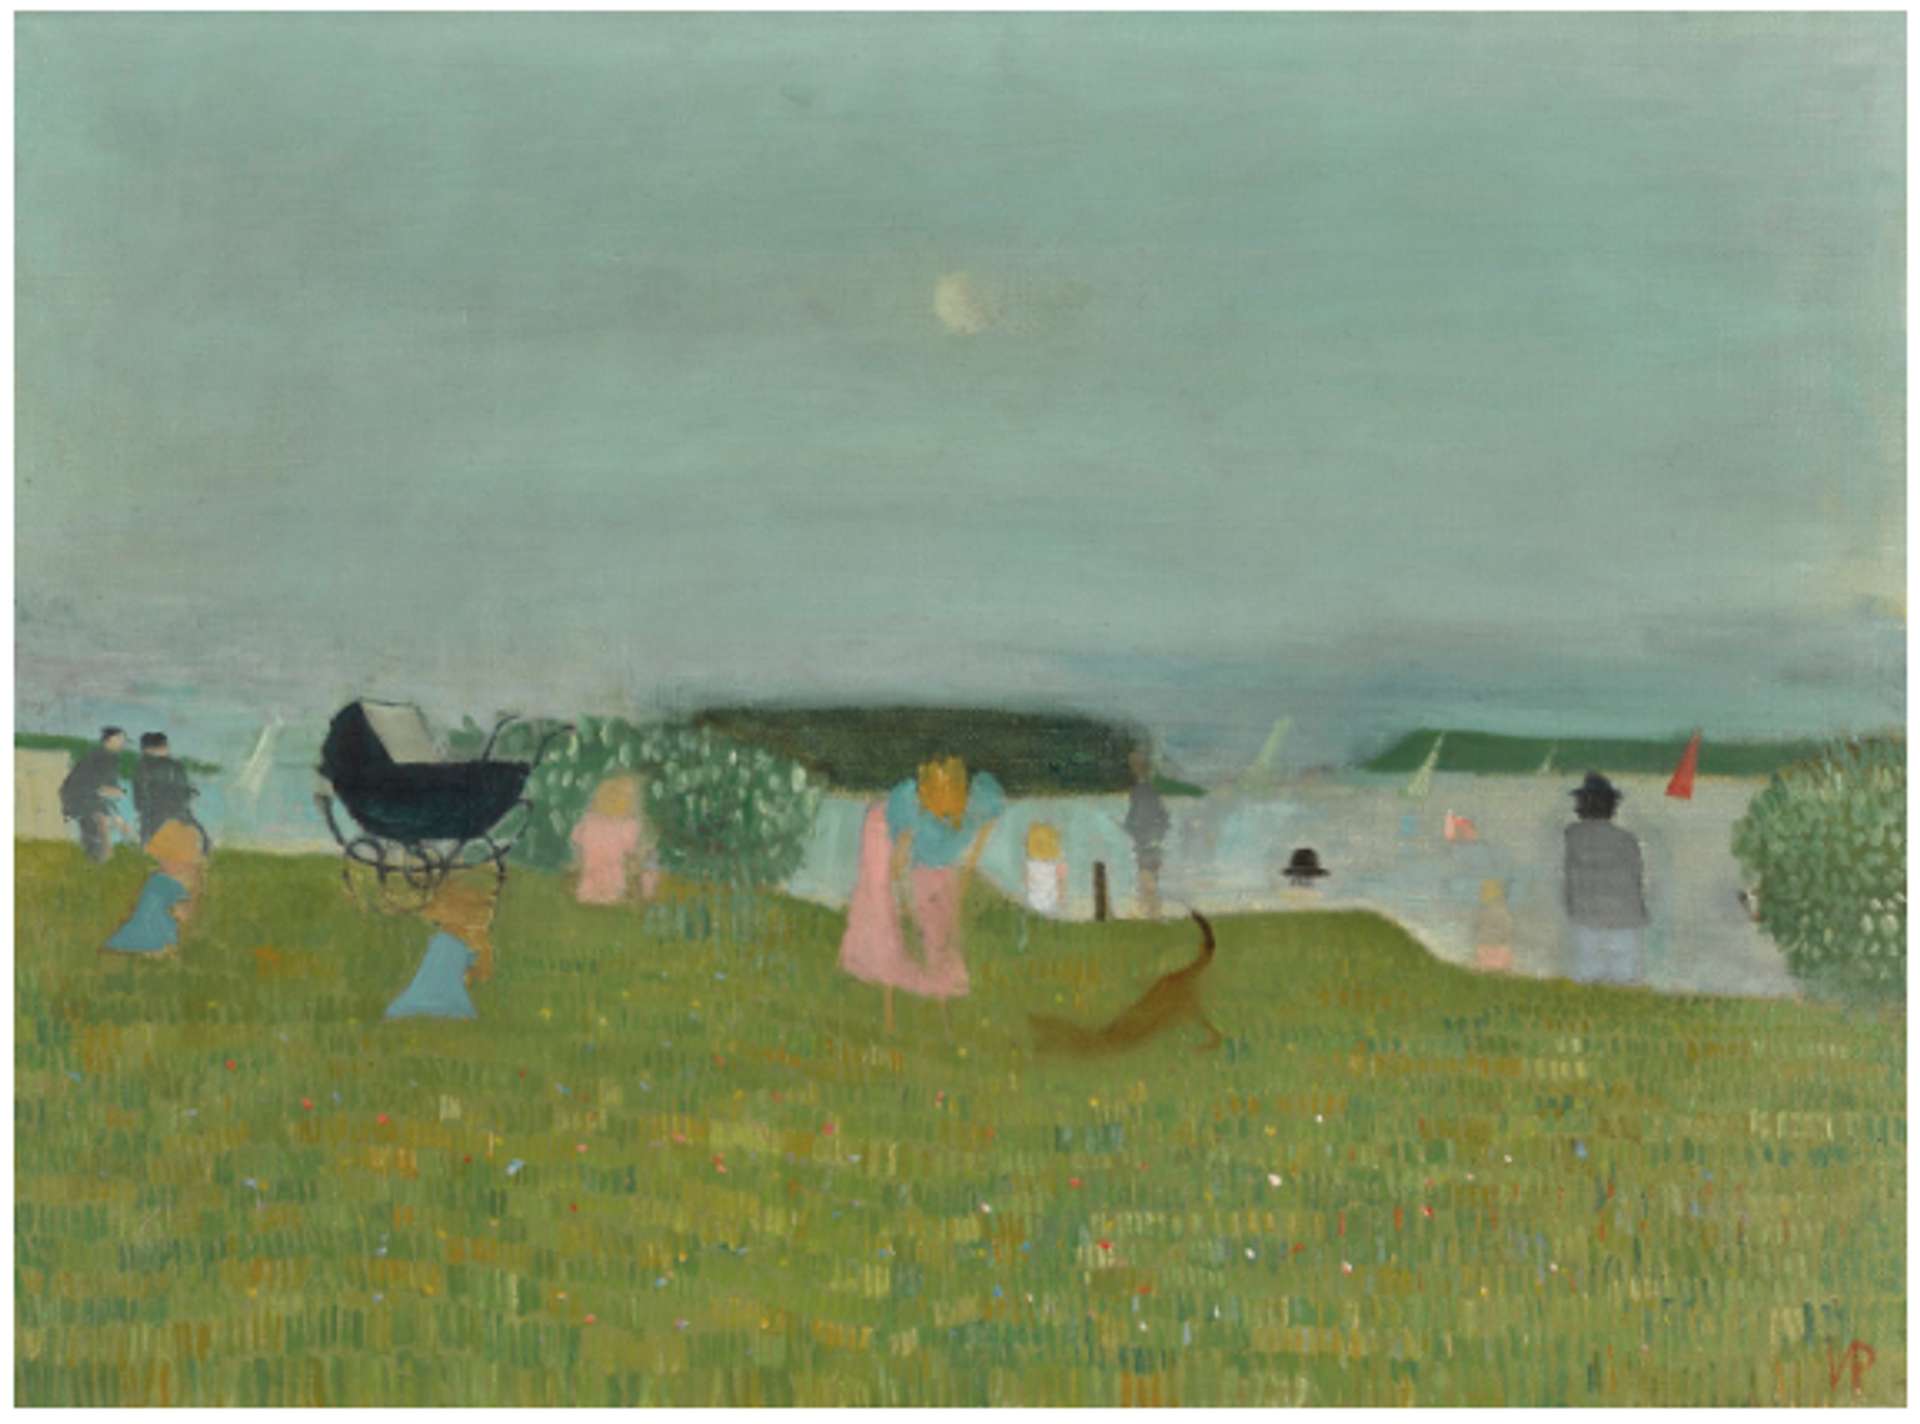 Multiple figures are portrayed in a sprawling green garden, each occupying their own space without any apparent interaction. Positioned towards the left side of the artwork is a black pram, while in the background, a river flows with a peculiar black top hat mysteriously floating upon it. The scene is completed by the distant presence of shadowy mountains in the background.